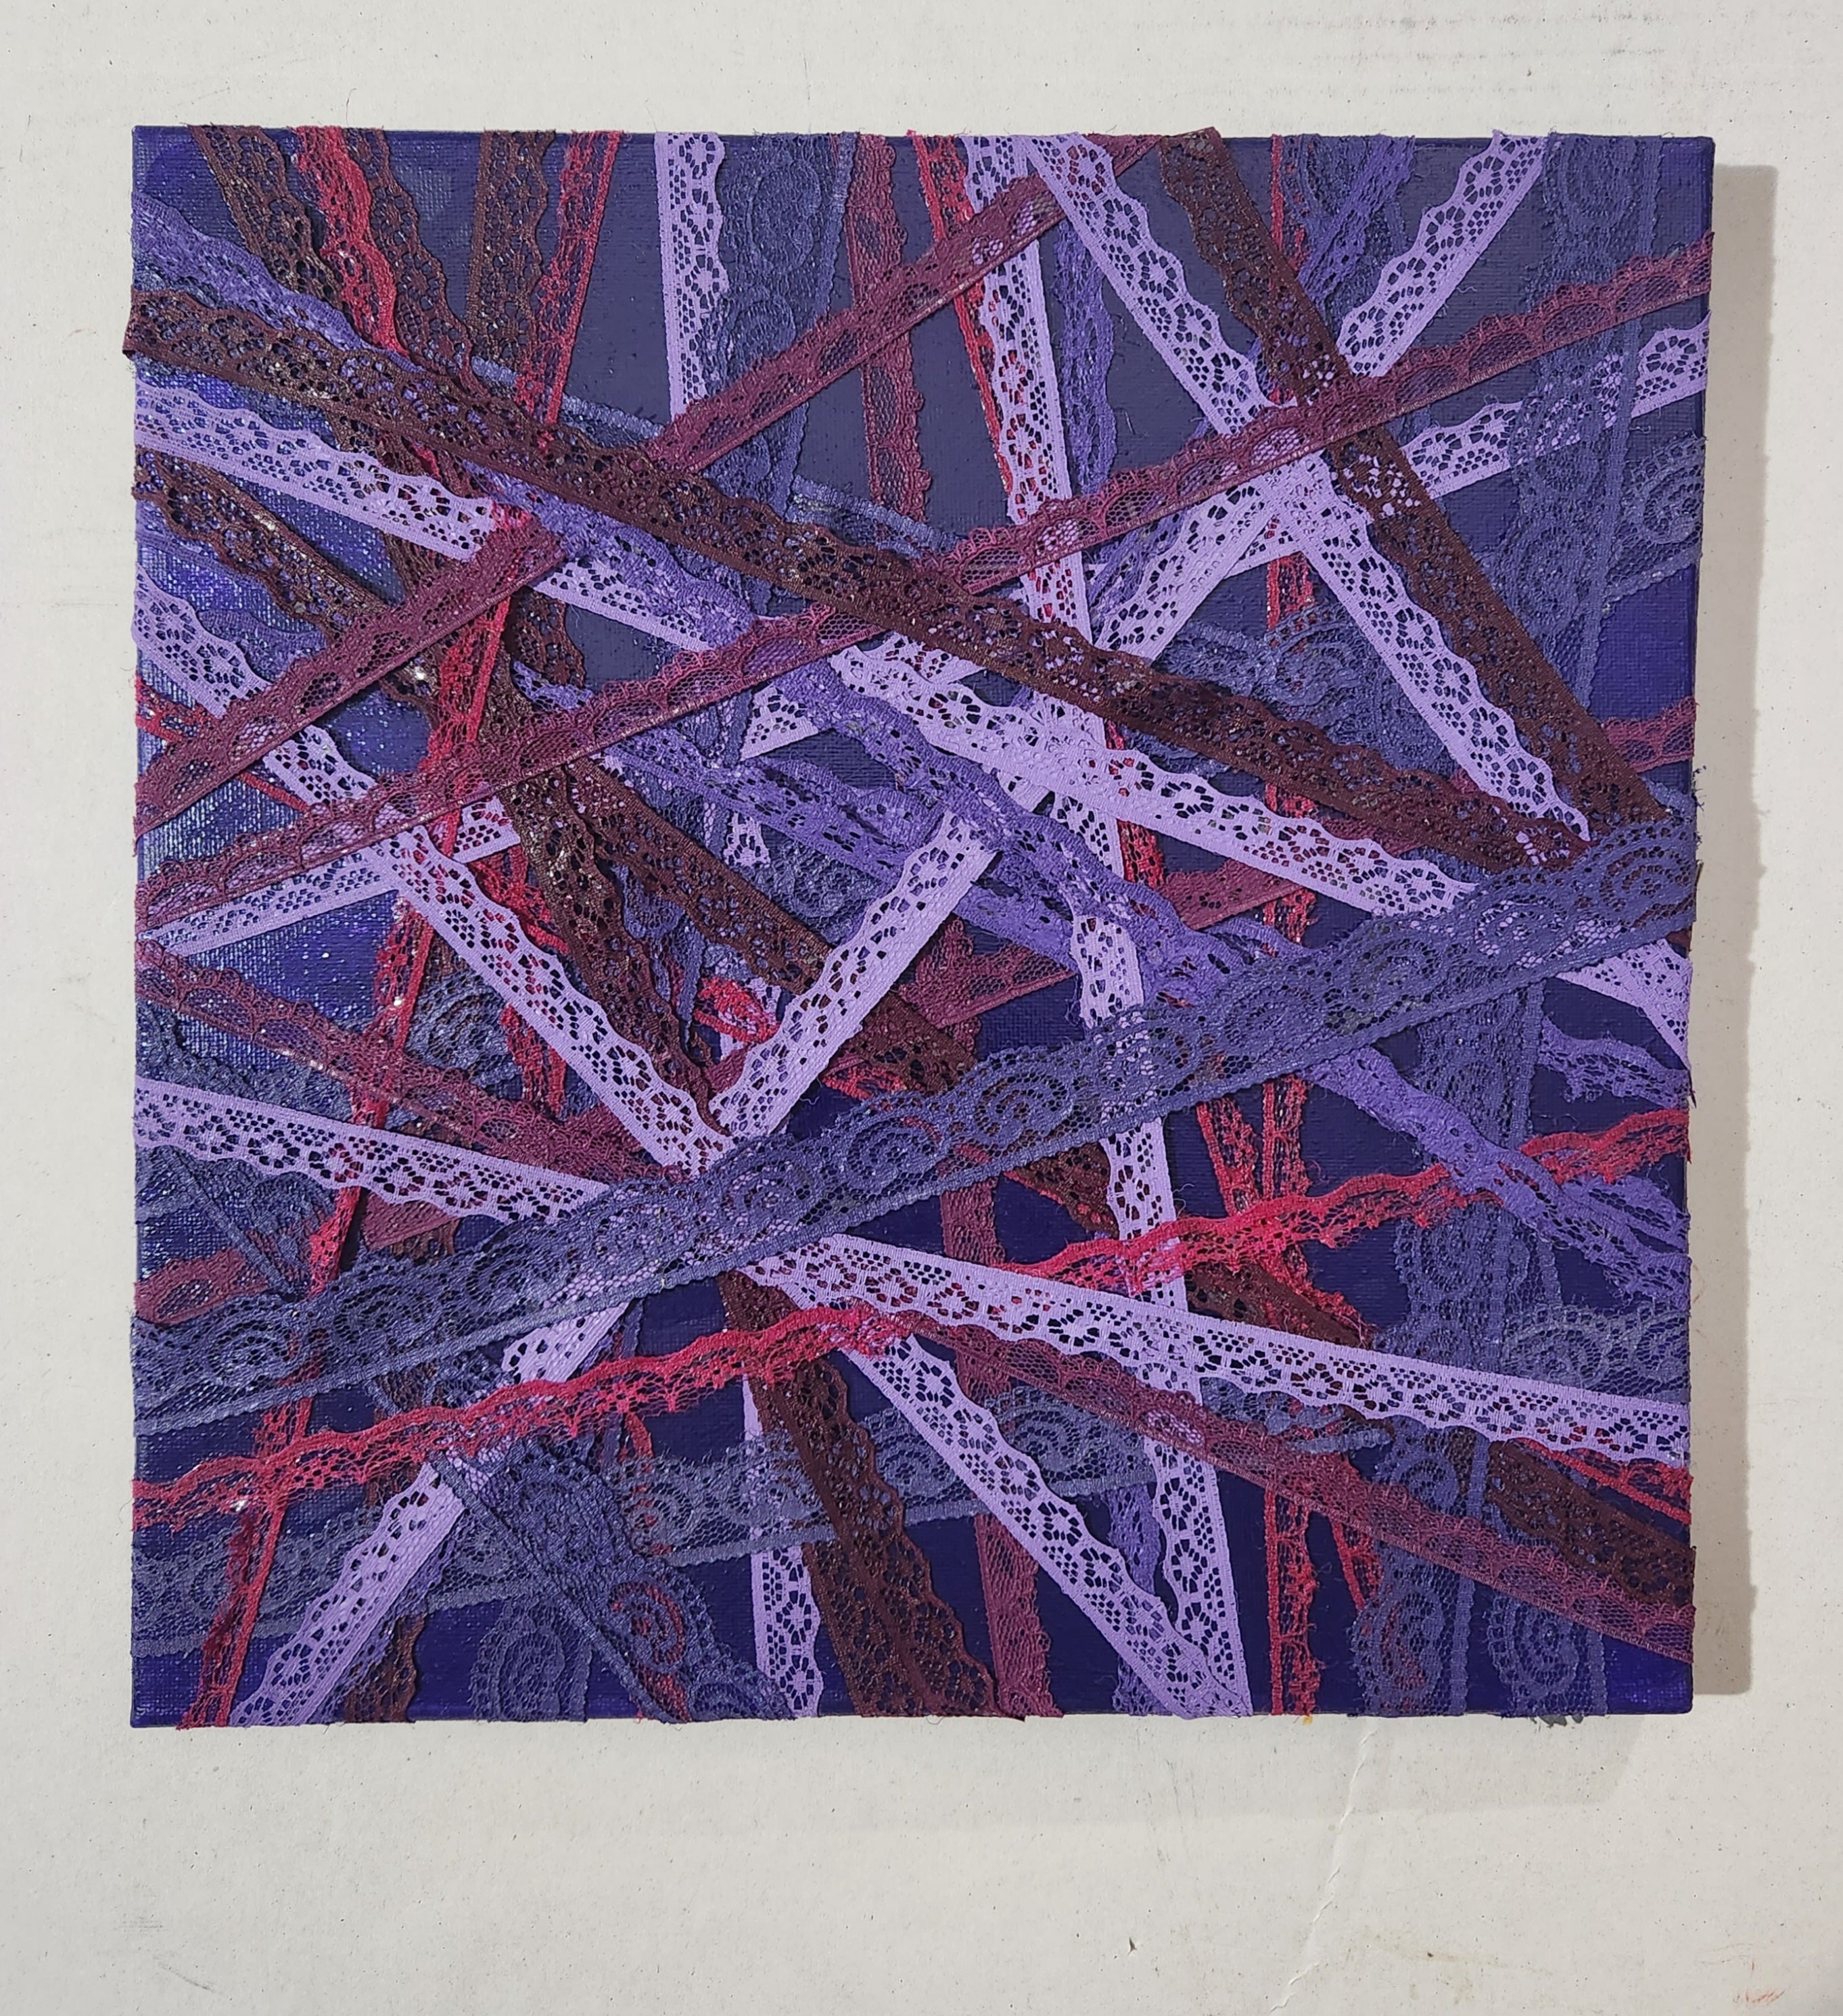 'PURPLE WEBS' Acrylic, Lace, and Mixed Media on Canvas